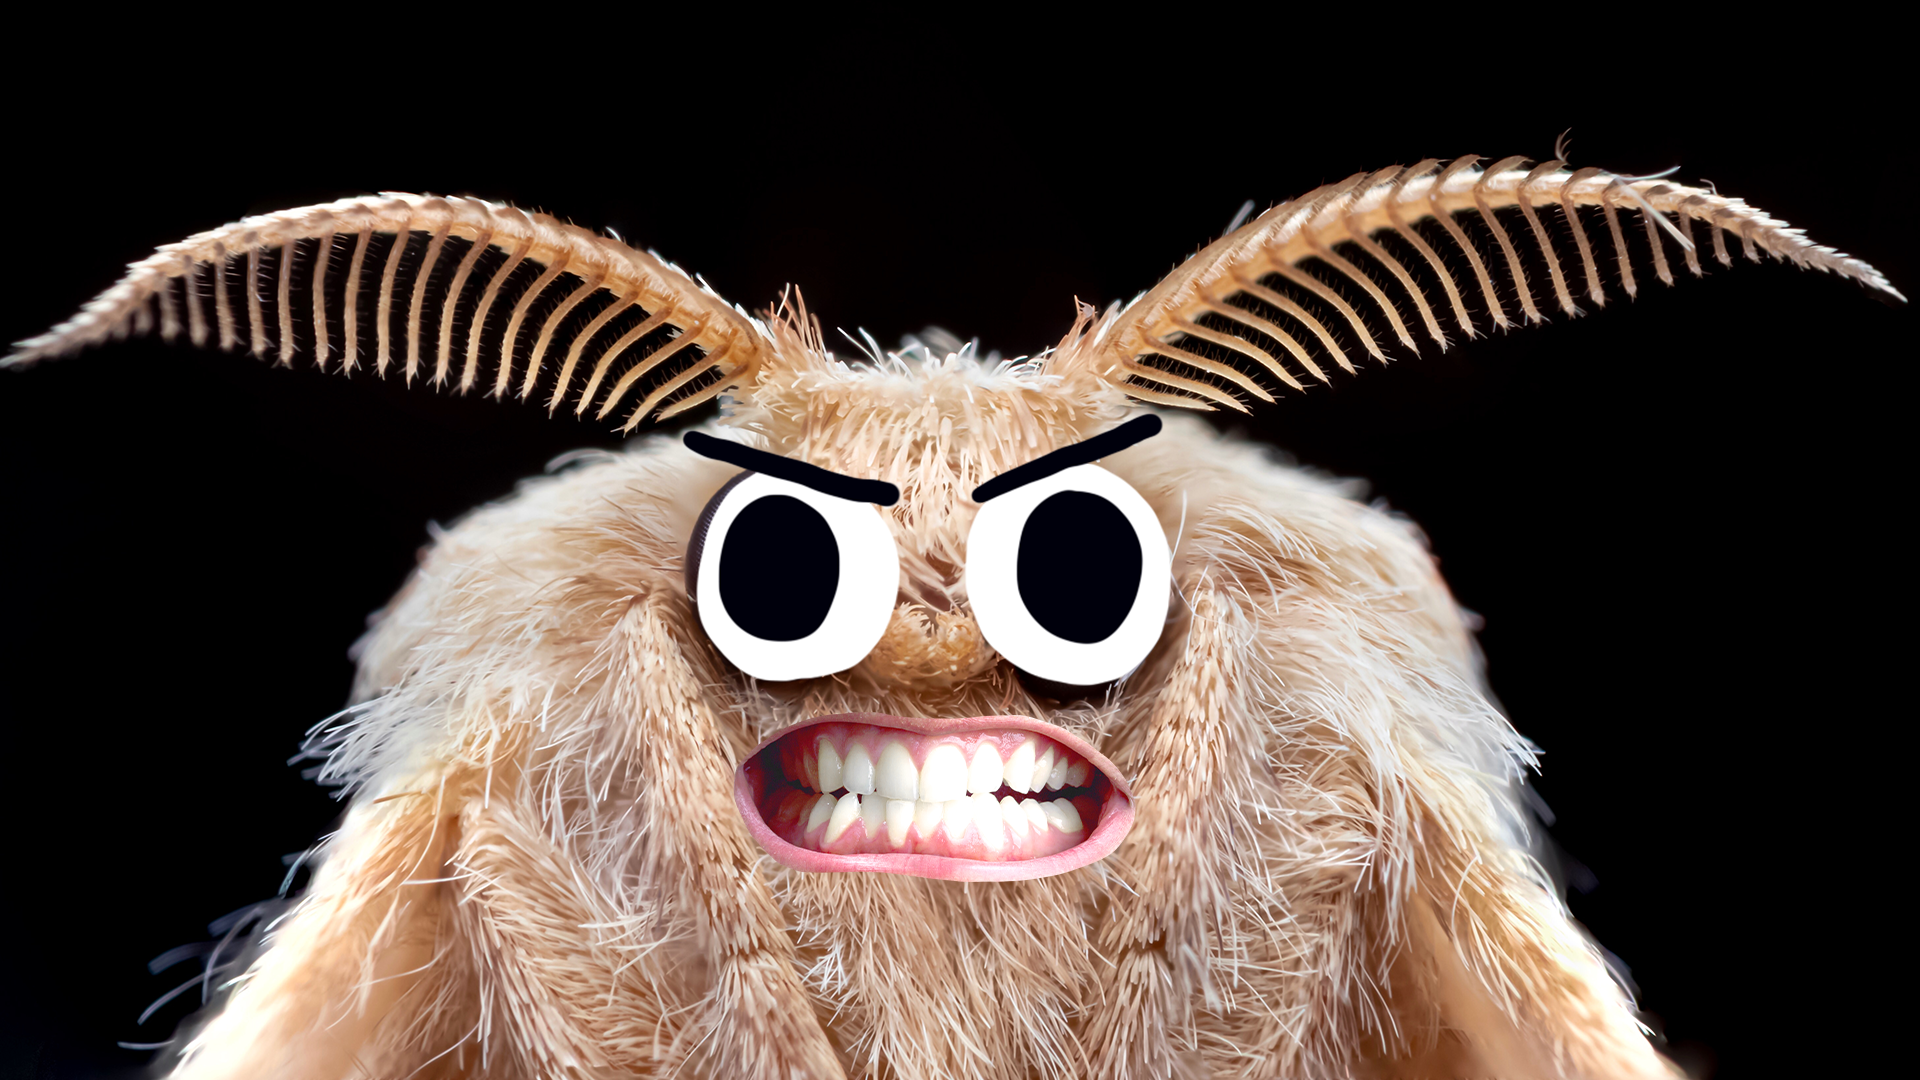 Moth with angry face